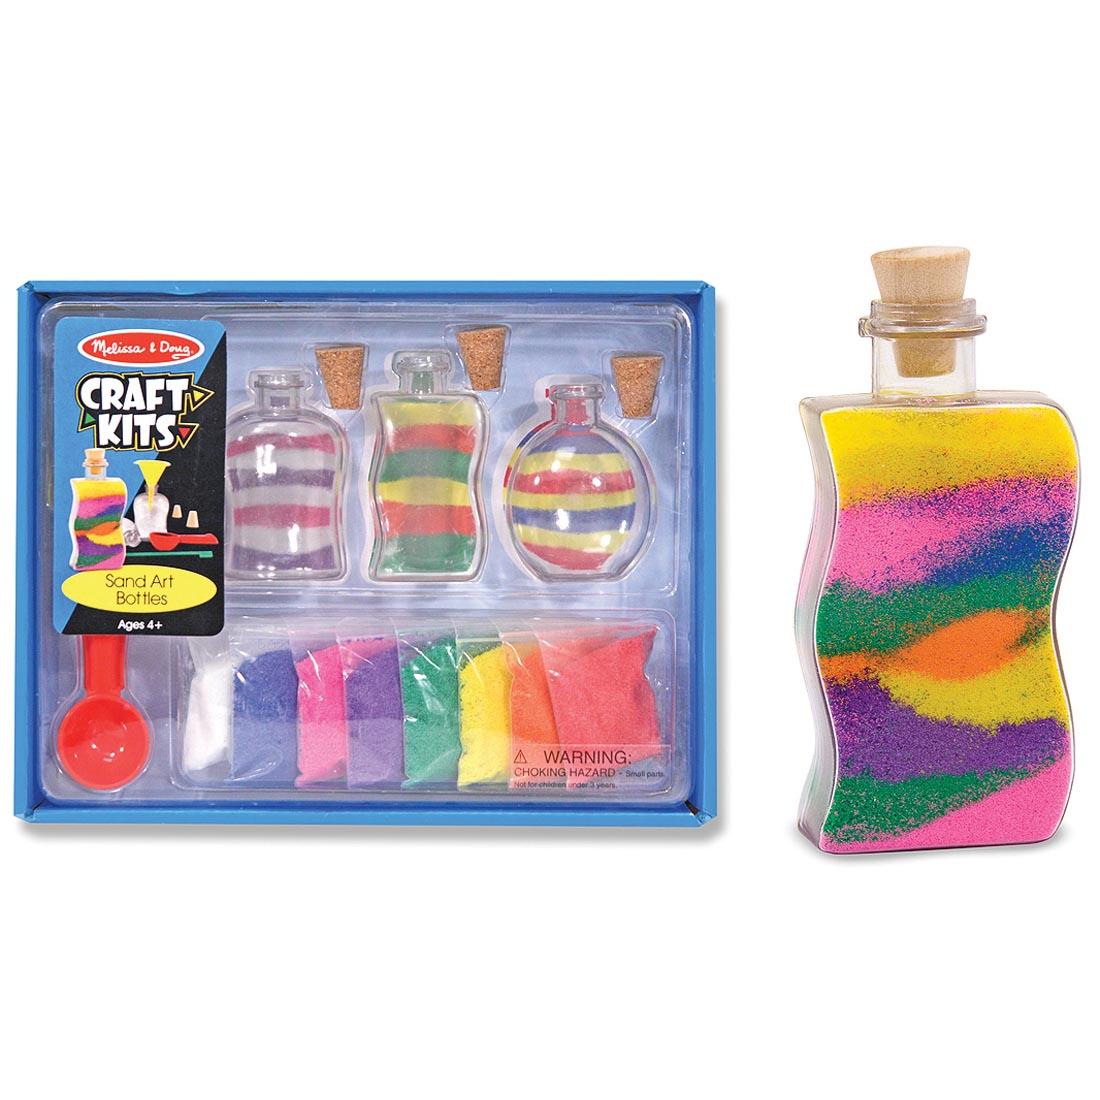 Sand Art Bottles Craft Kit shown next to a completed craft